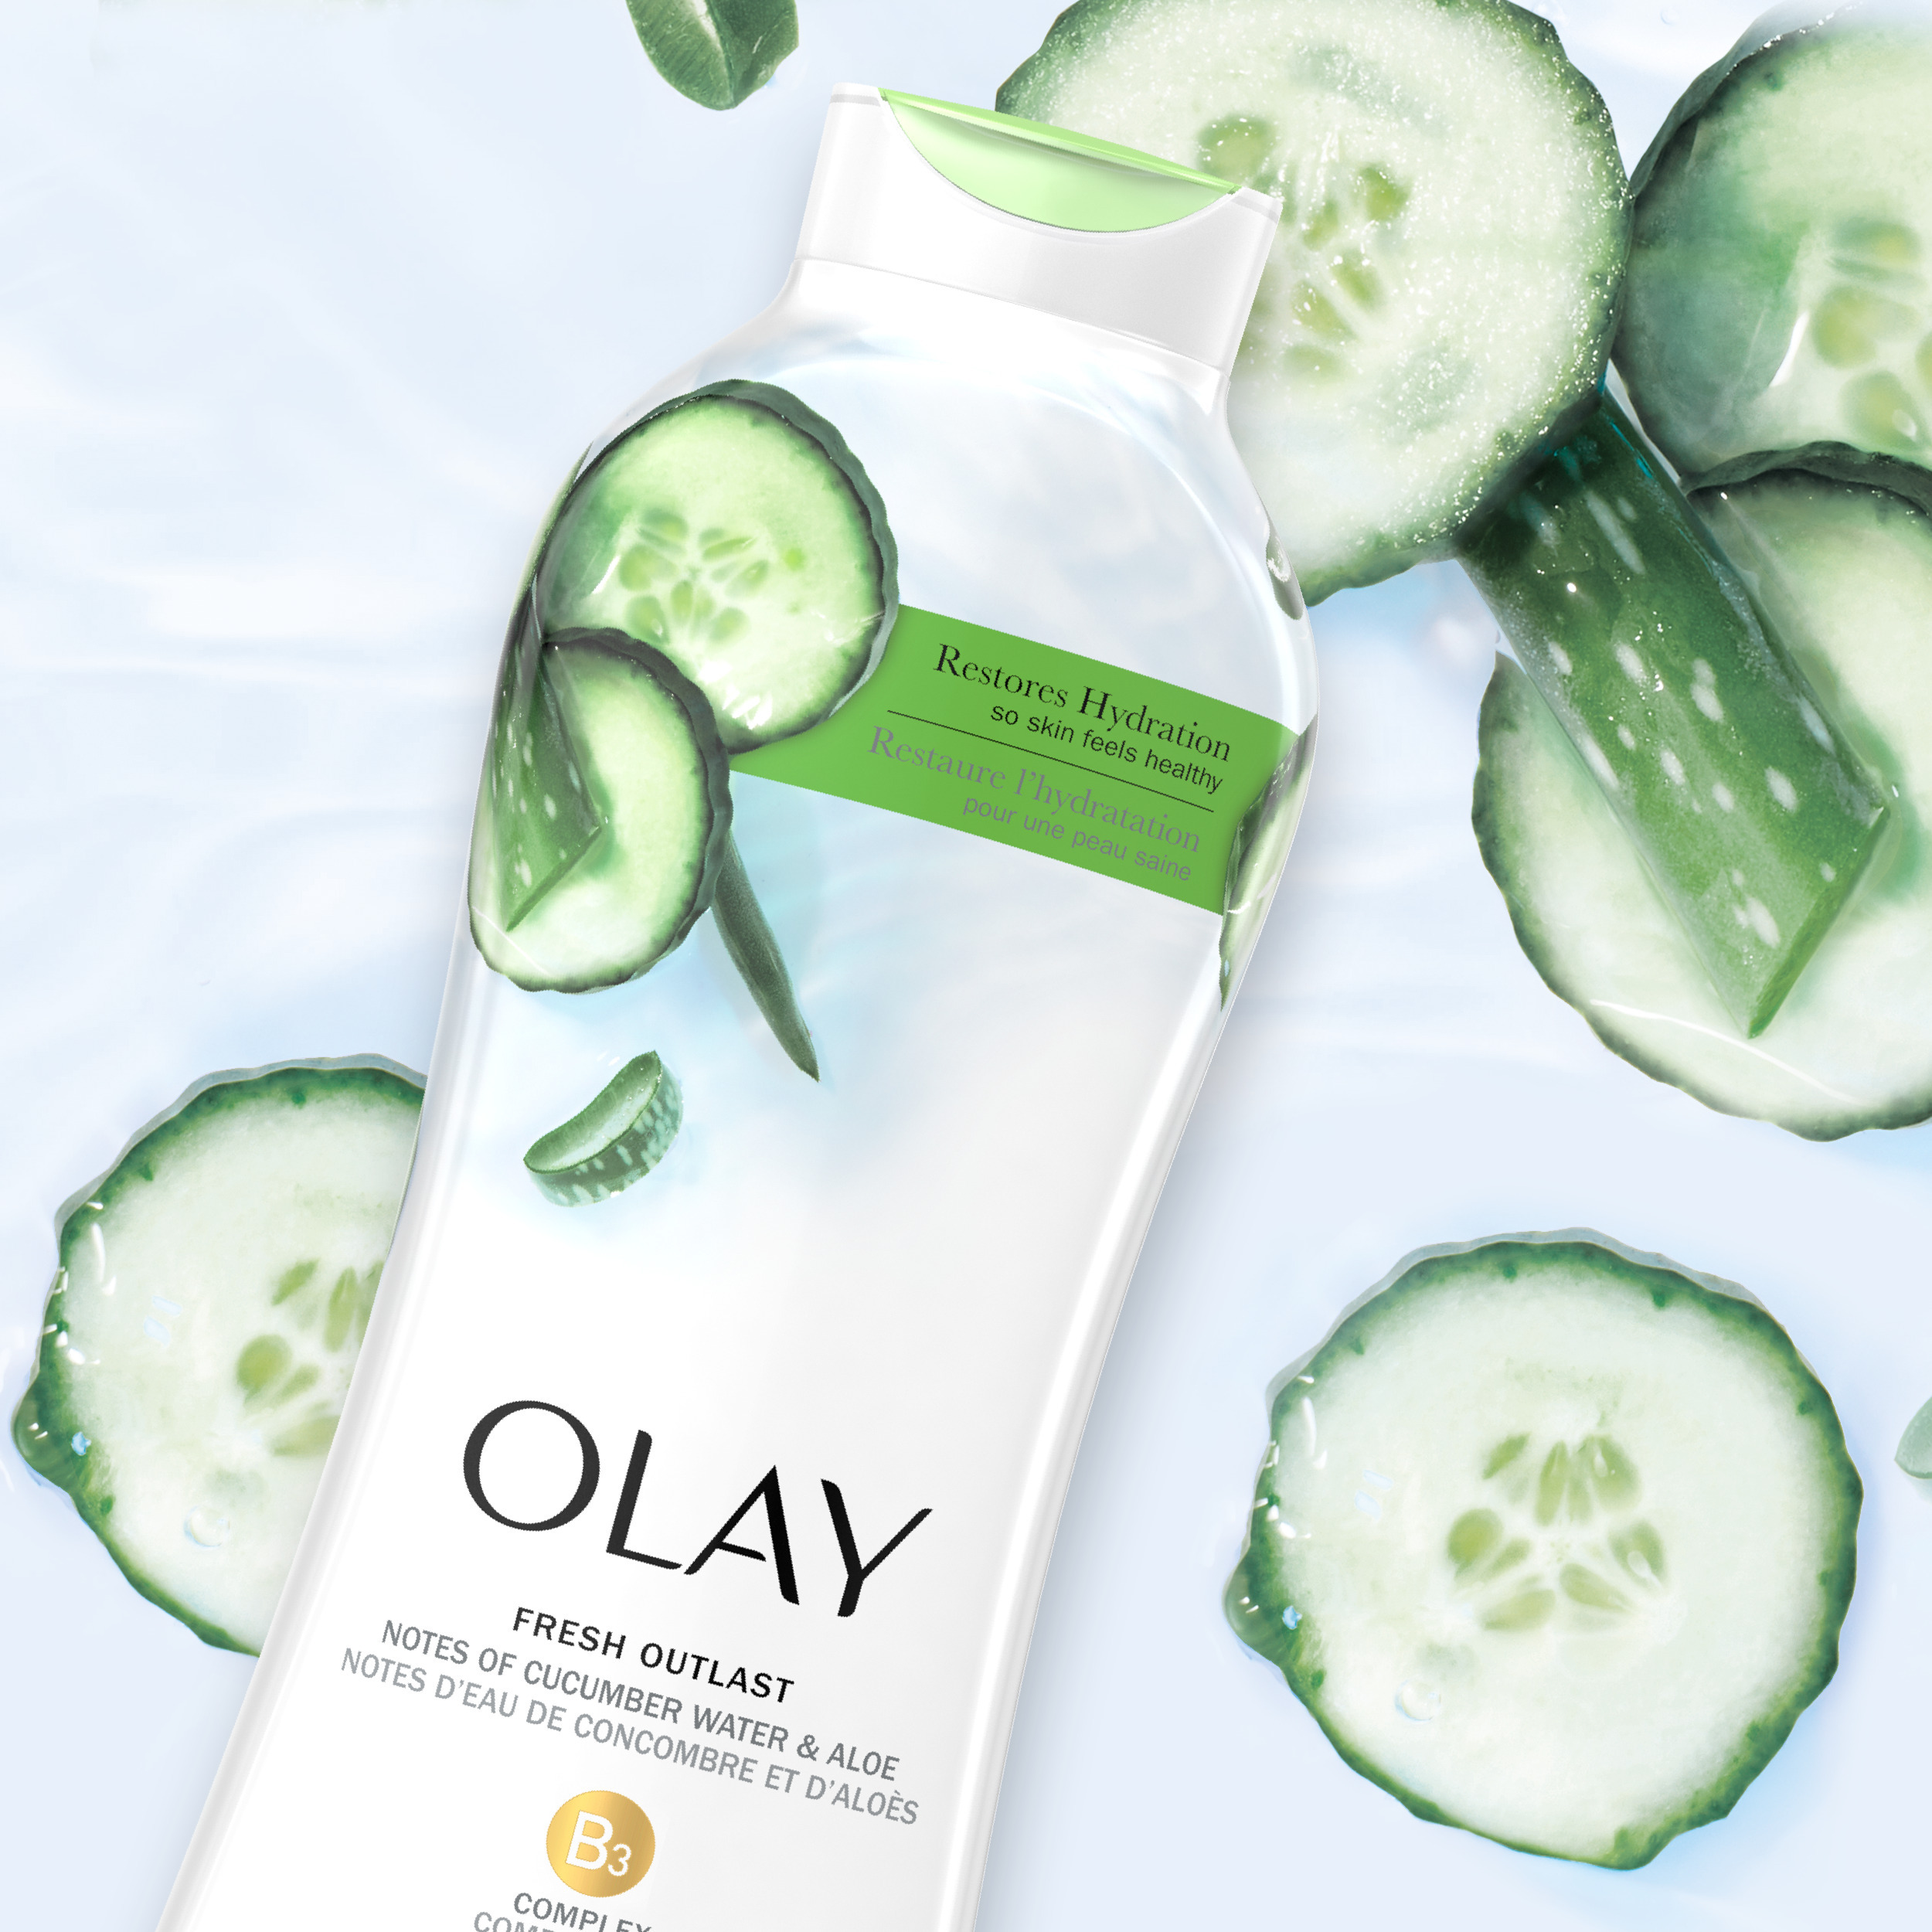 Olay Fresh Outlast Body Wash with Notes of Cucumber and Aloe, 22 fl oz - image 4 of 11